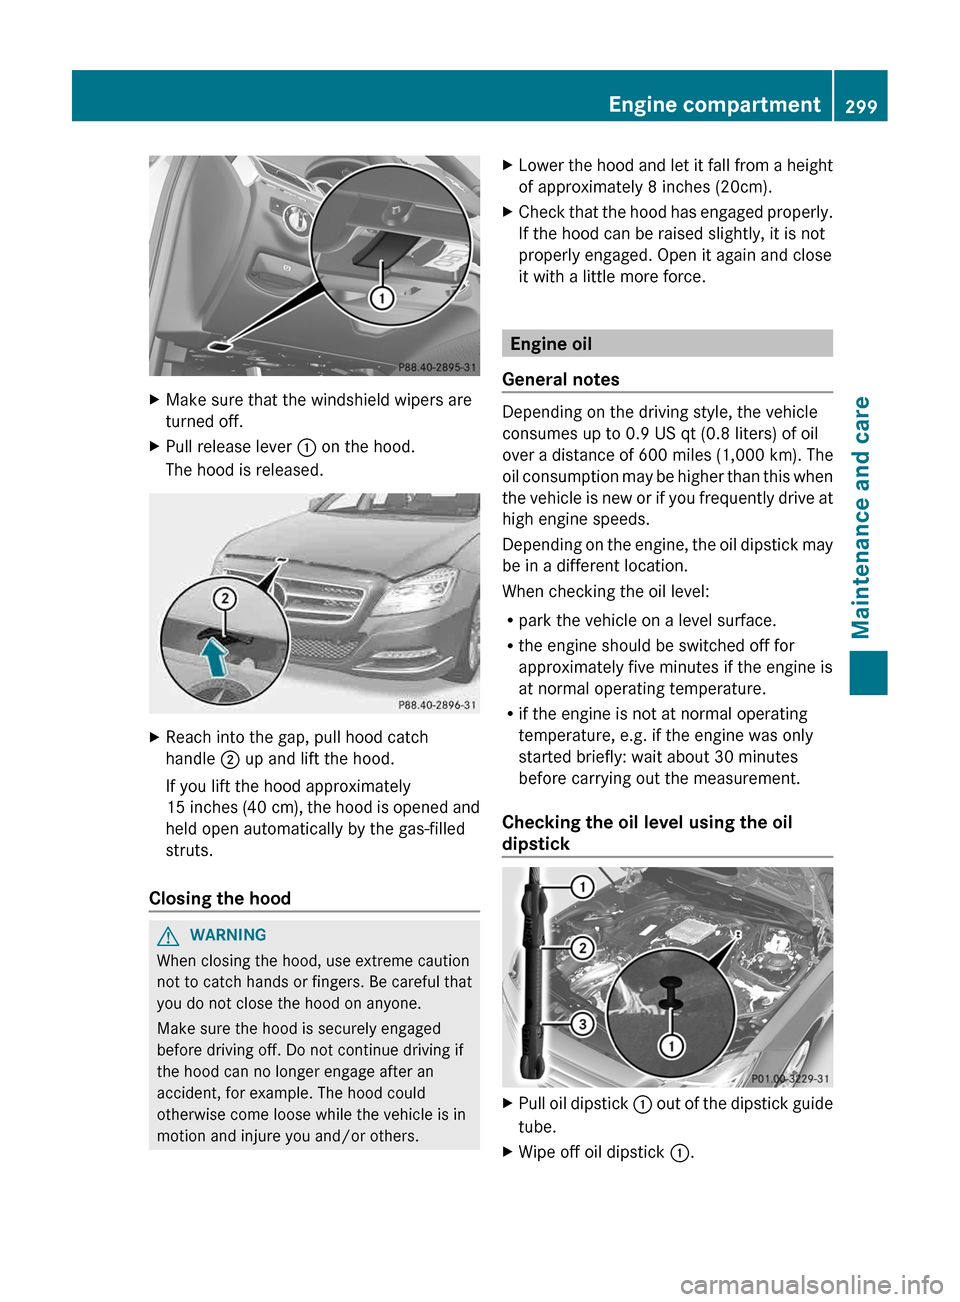 MERCEDES-BENZ CLS-Class 2013 W218 Owners Guide X
Make sure that the windshield wipers are
turned off.
X Pull release lever  : on the hood.
The hood is released. X
Reach into the gap, pull hood catch
handle  ; up and lift the hood.
If you lift the 